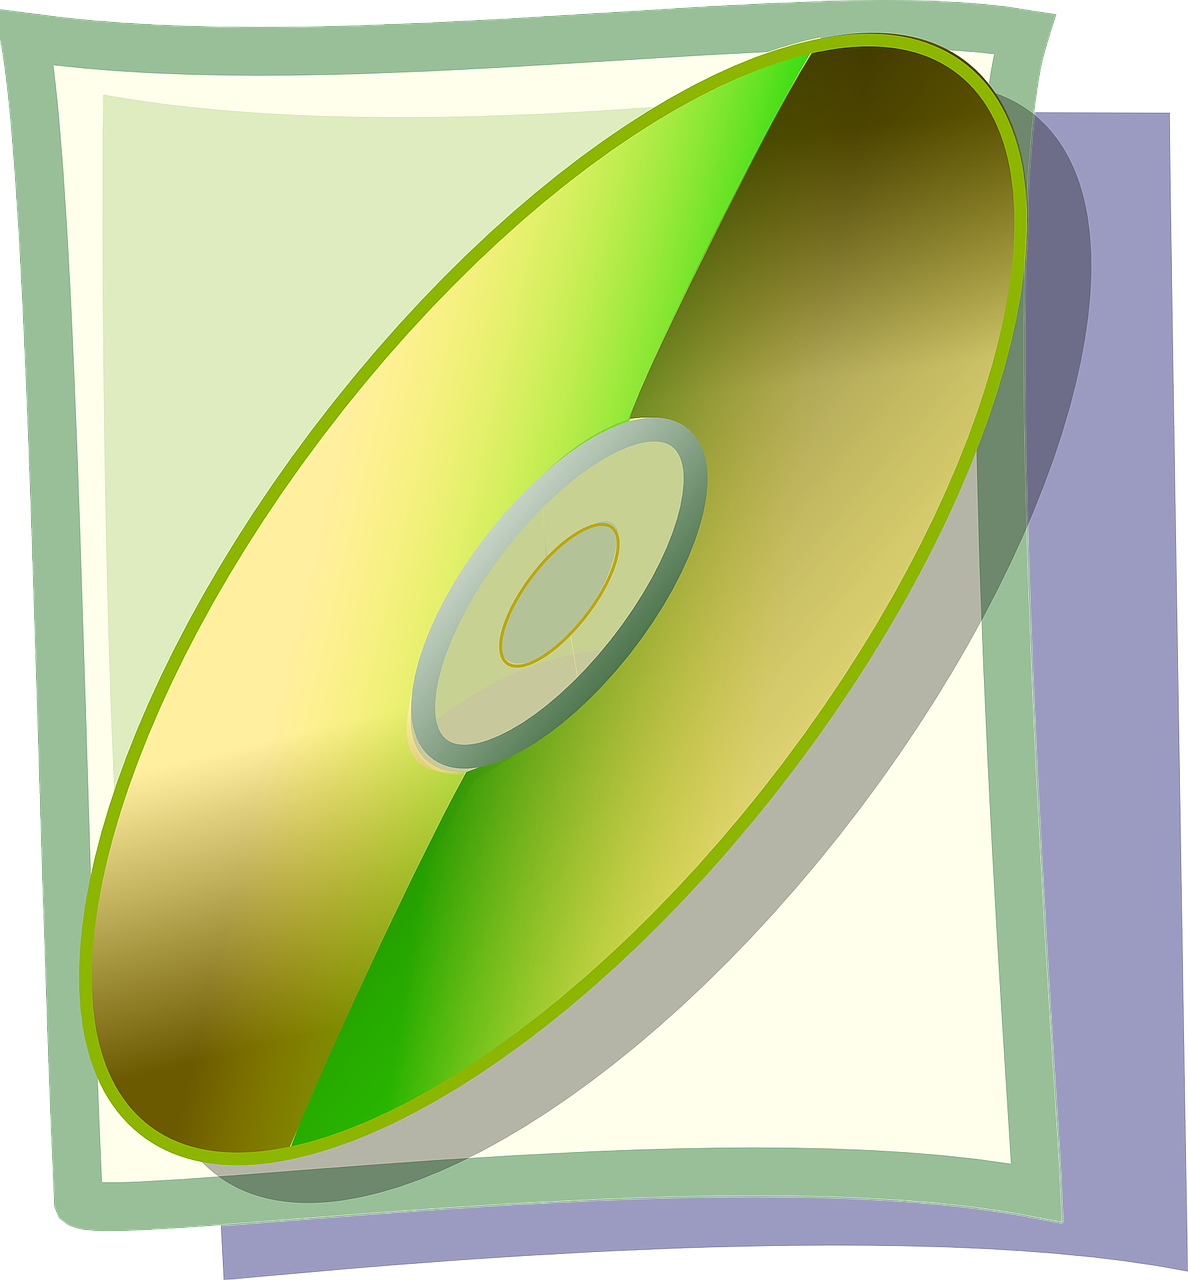 a cd sitting on top of a piece of paper, a computer rendering, computer art, vector images, greenish tinge, dvd, golden